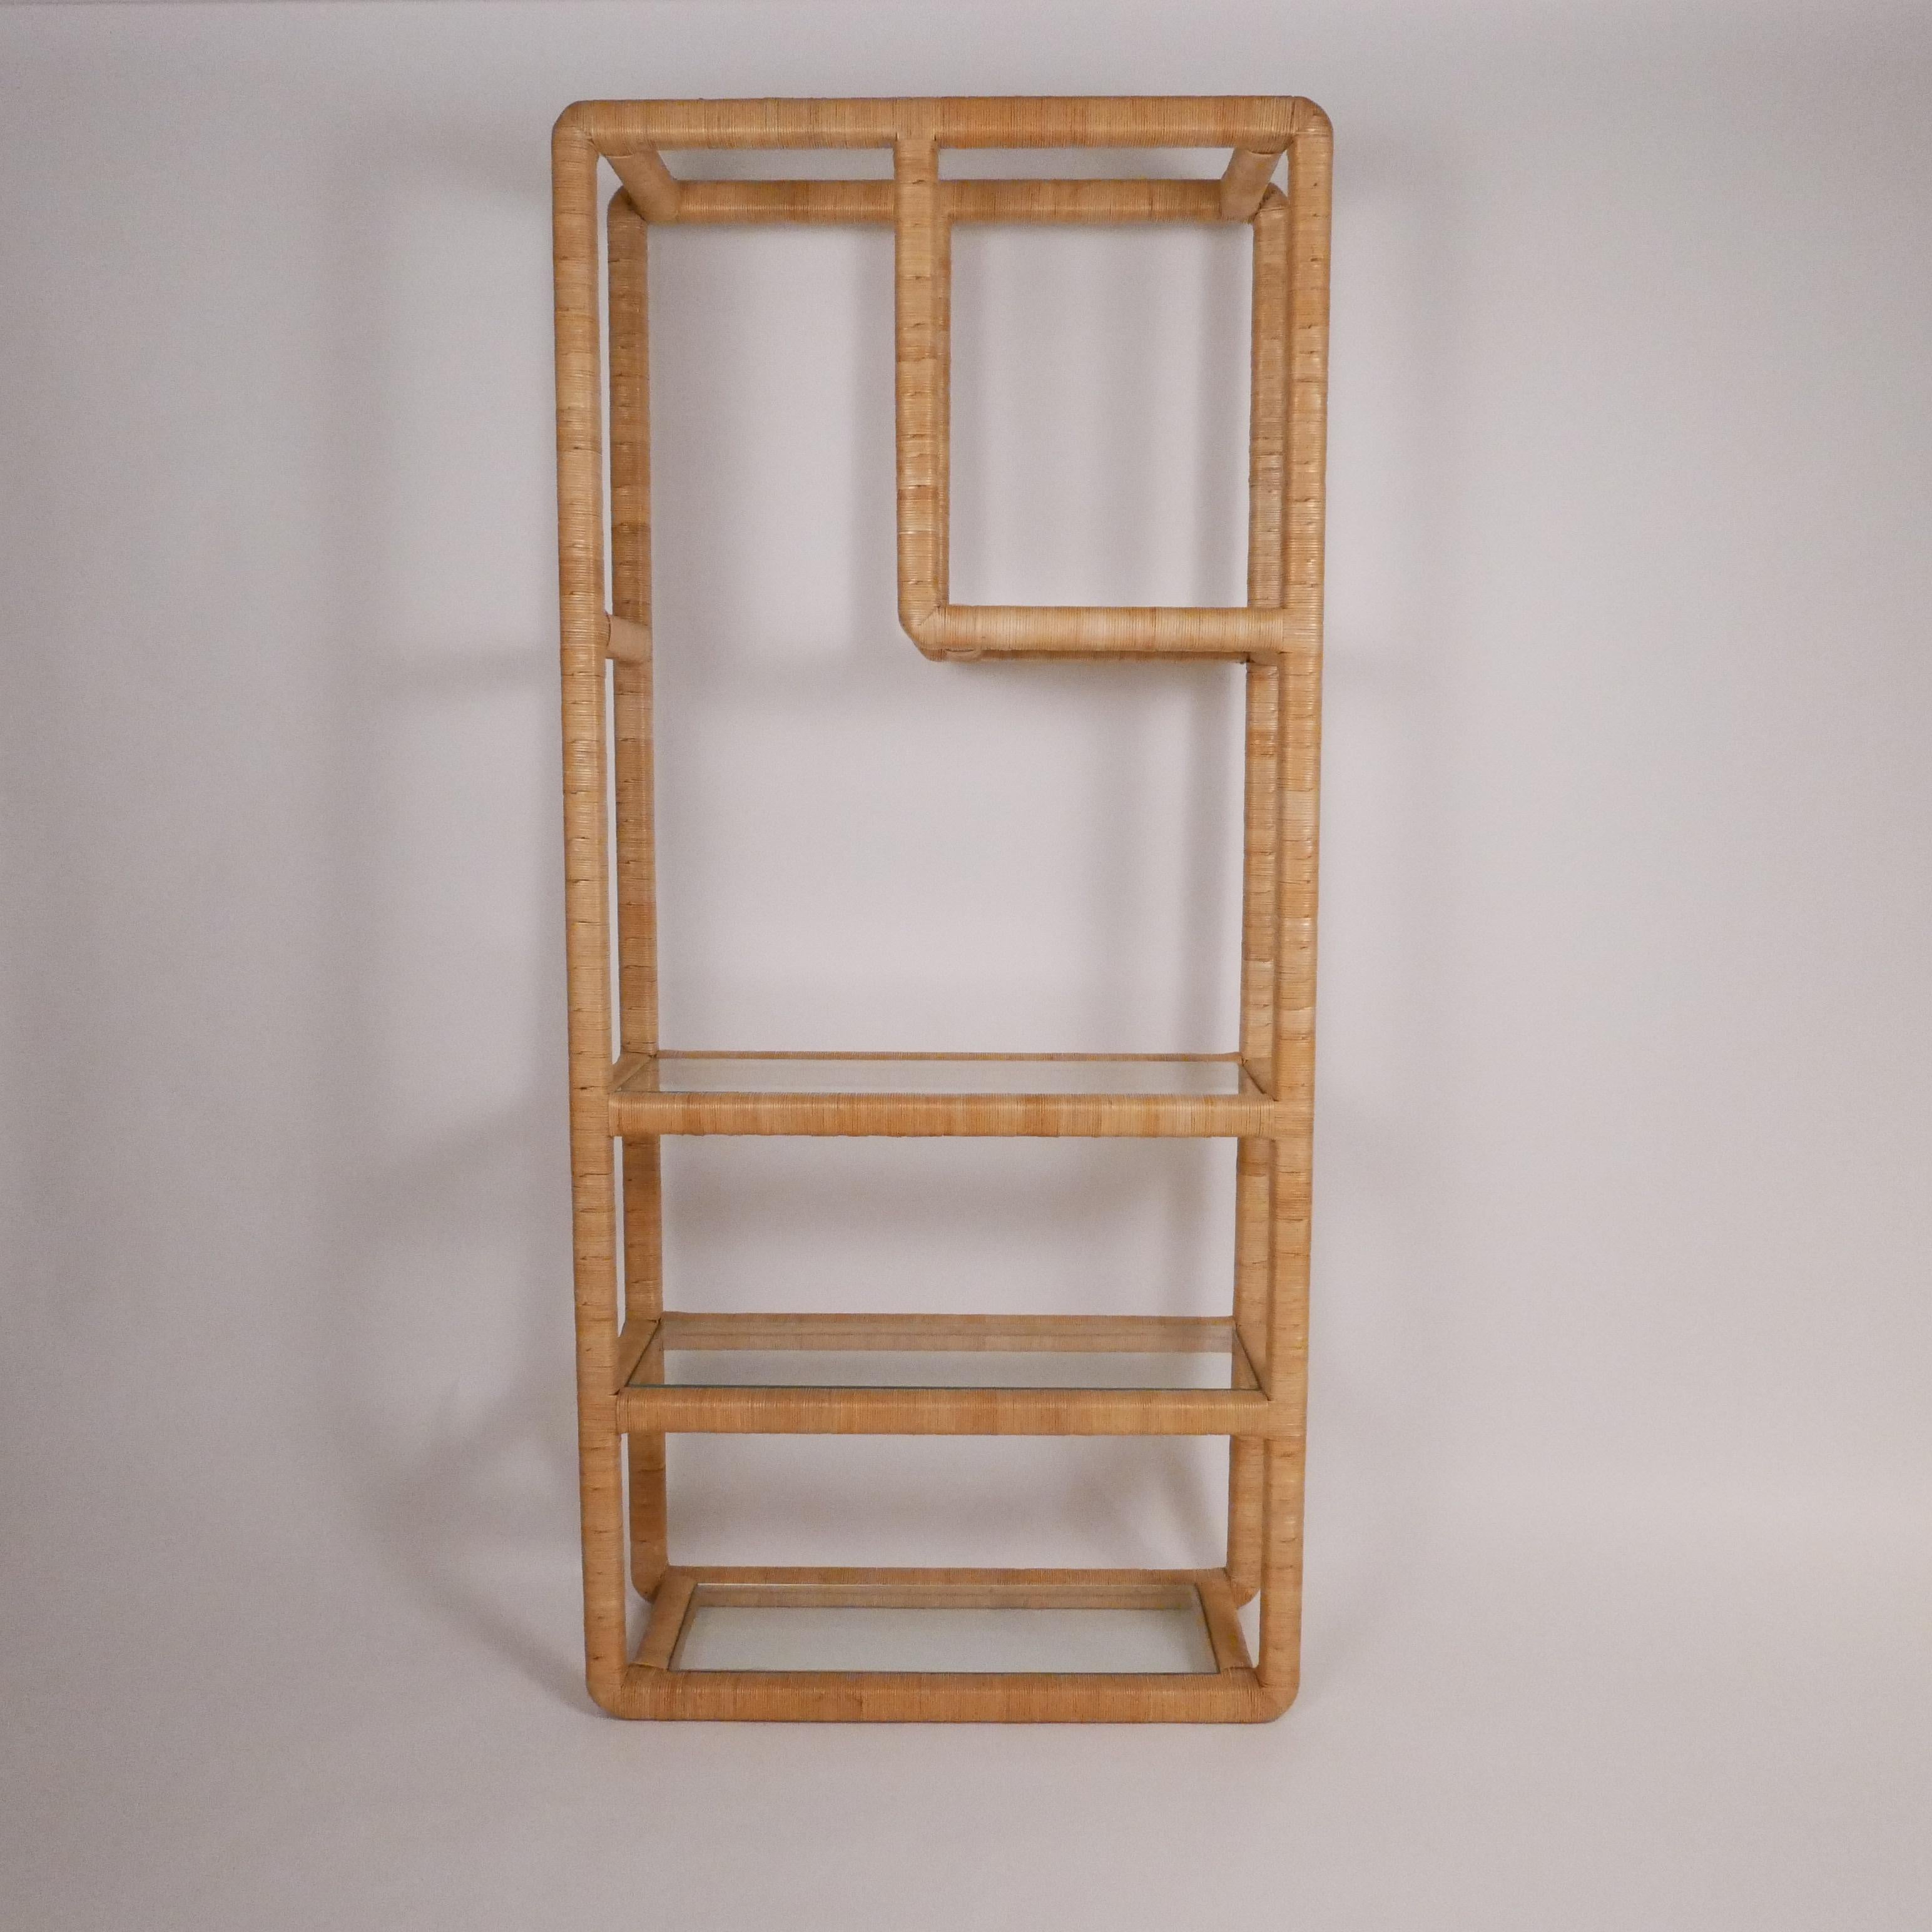 Wicker Pair Midcentury Regency Rattan Cane and Glass Shelving Units- Priced per piece